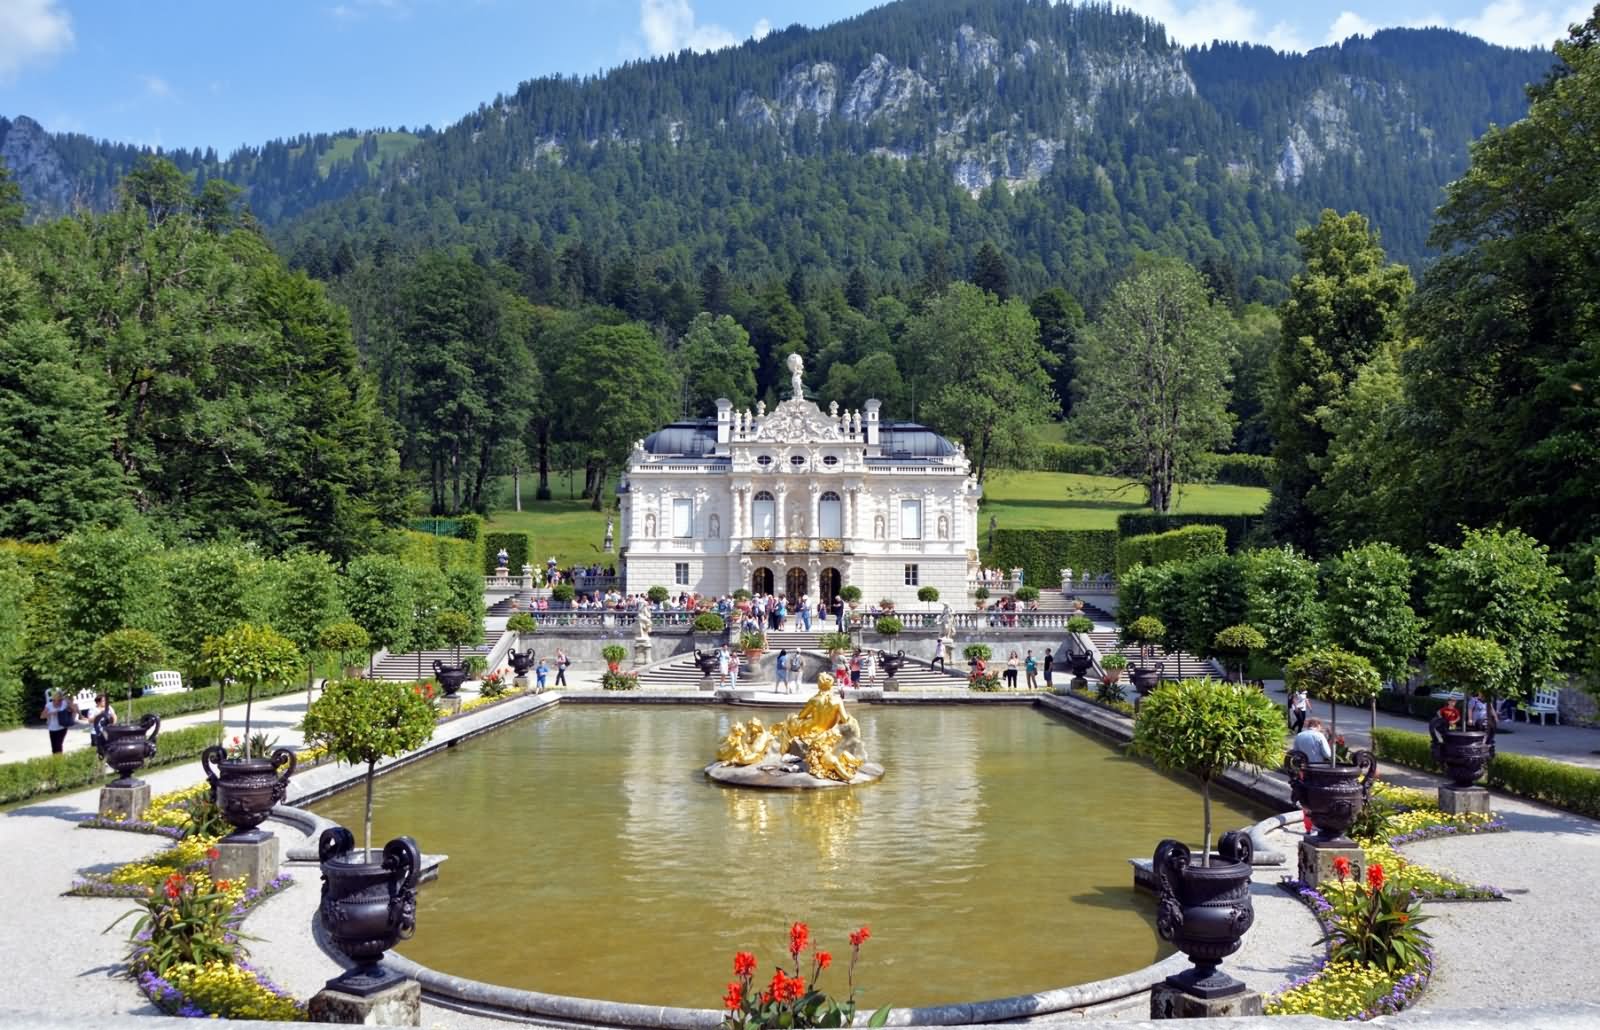 Front Image Of The Linderhof Palace In Bavaria, Germany